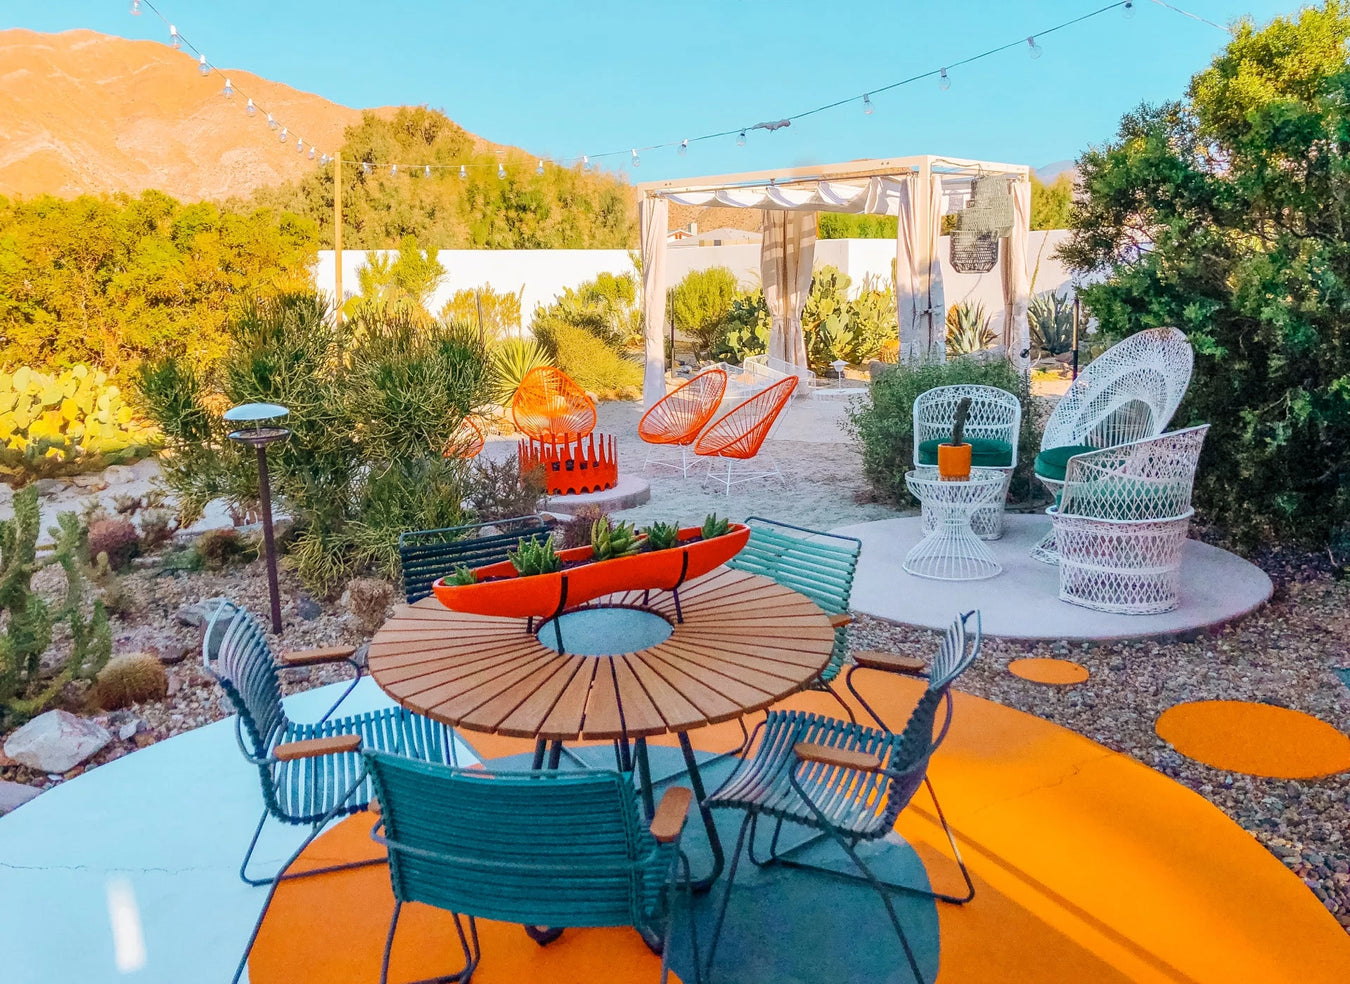 Palm Springs desert patio for Trixie Motel designer Dani Dazey featuring bright colors and midcentury modern styles.